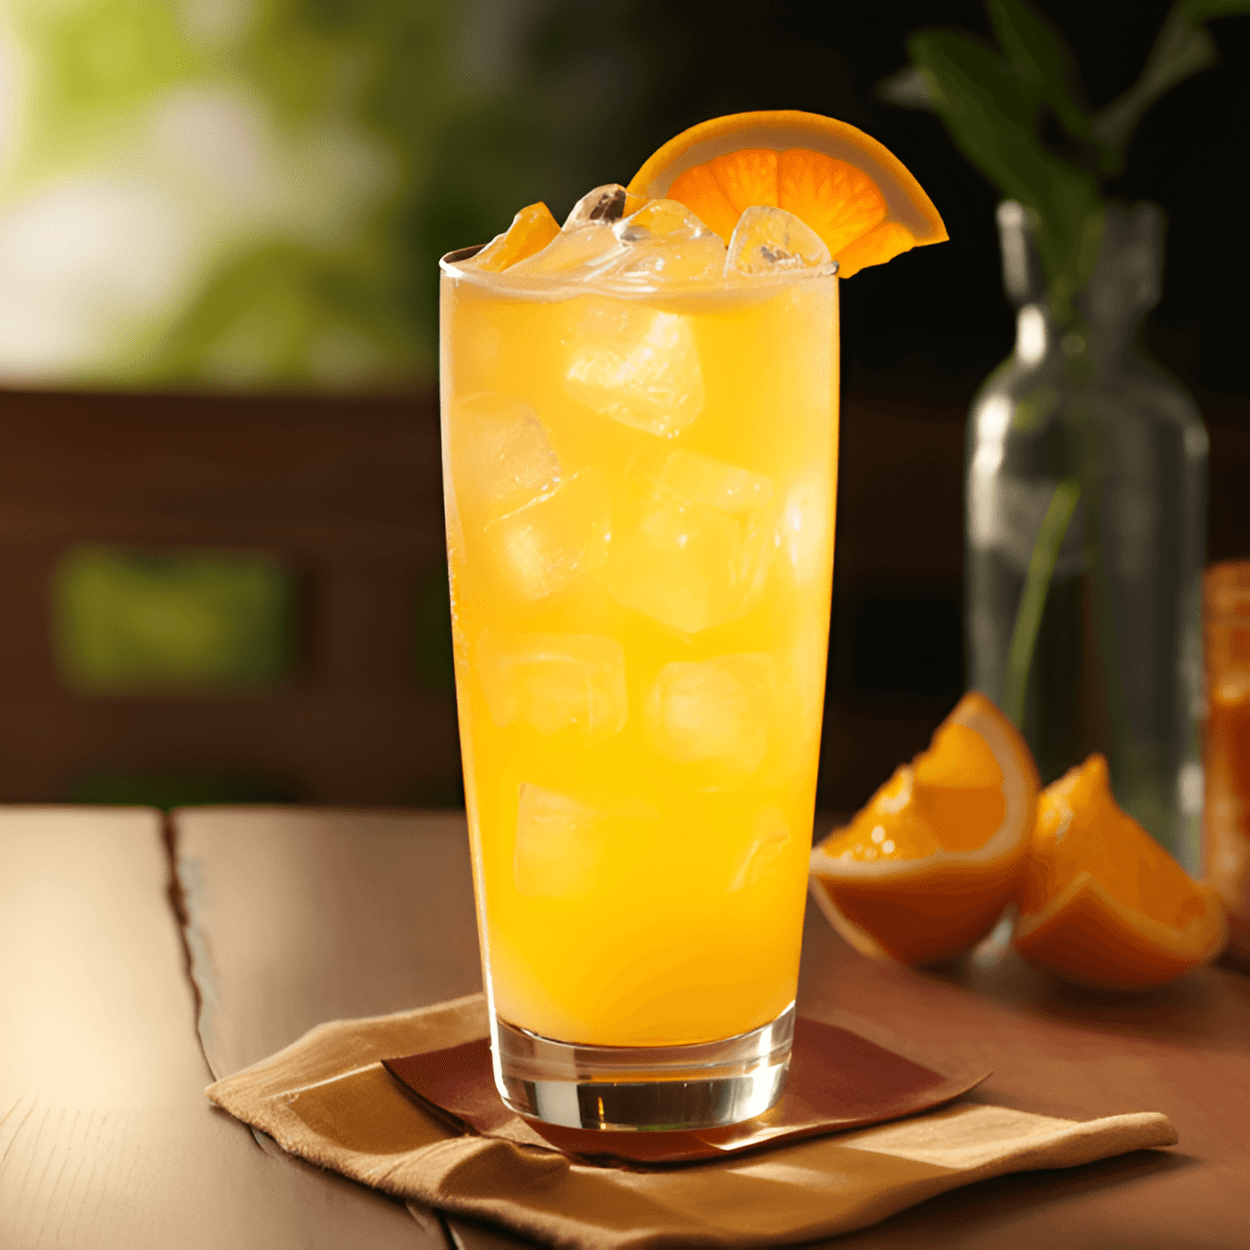 Fuzzy Navel Cocktail Recipe - The Fuzzy Navel is a sweet, fruity, and refreshing cocktail. It has a bright citrus taste from the orange juice, combined with the smooth and sweet flavor of peach schnapps. The drink is light and easy to sip, making it perfect for warm weather or a relaxing evening.